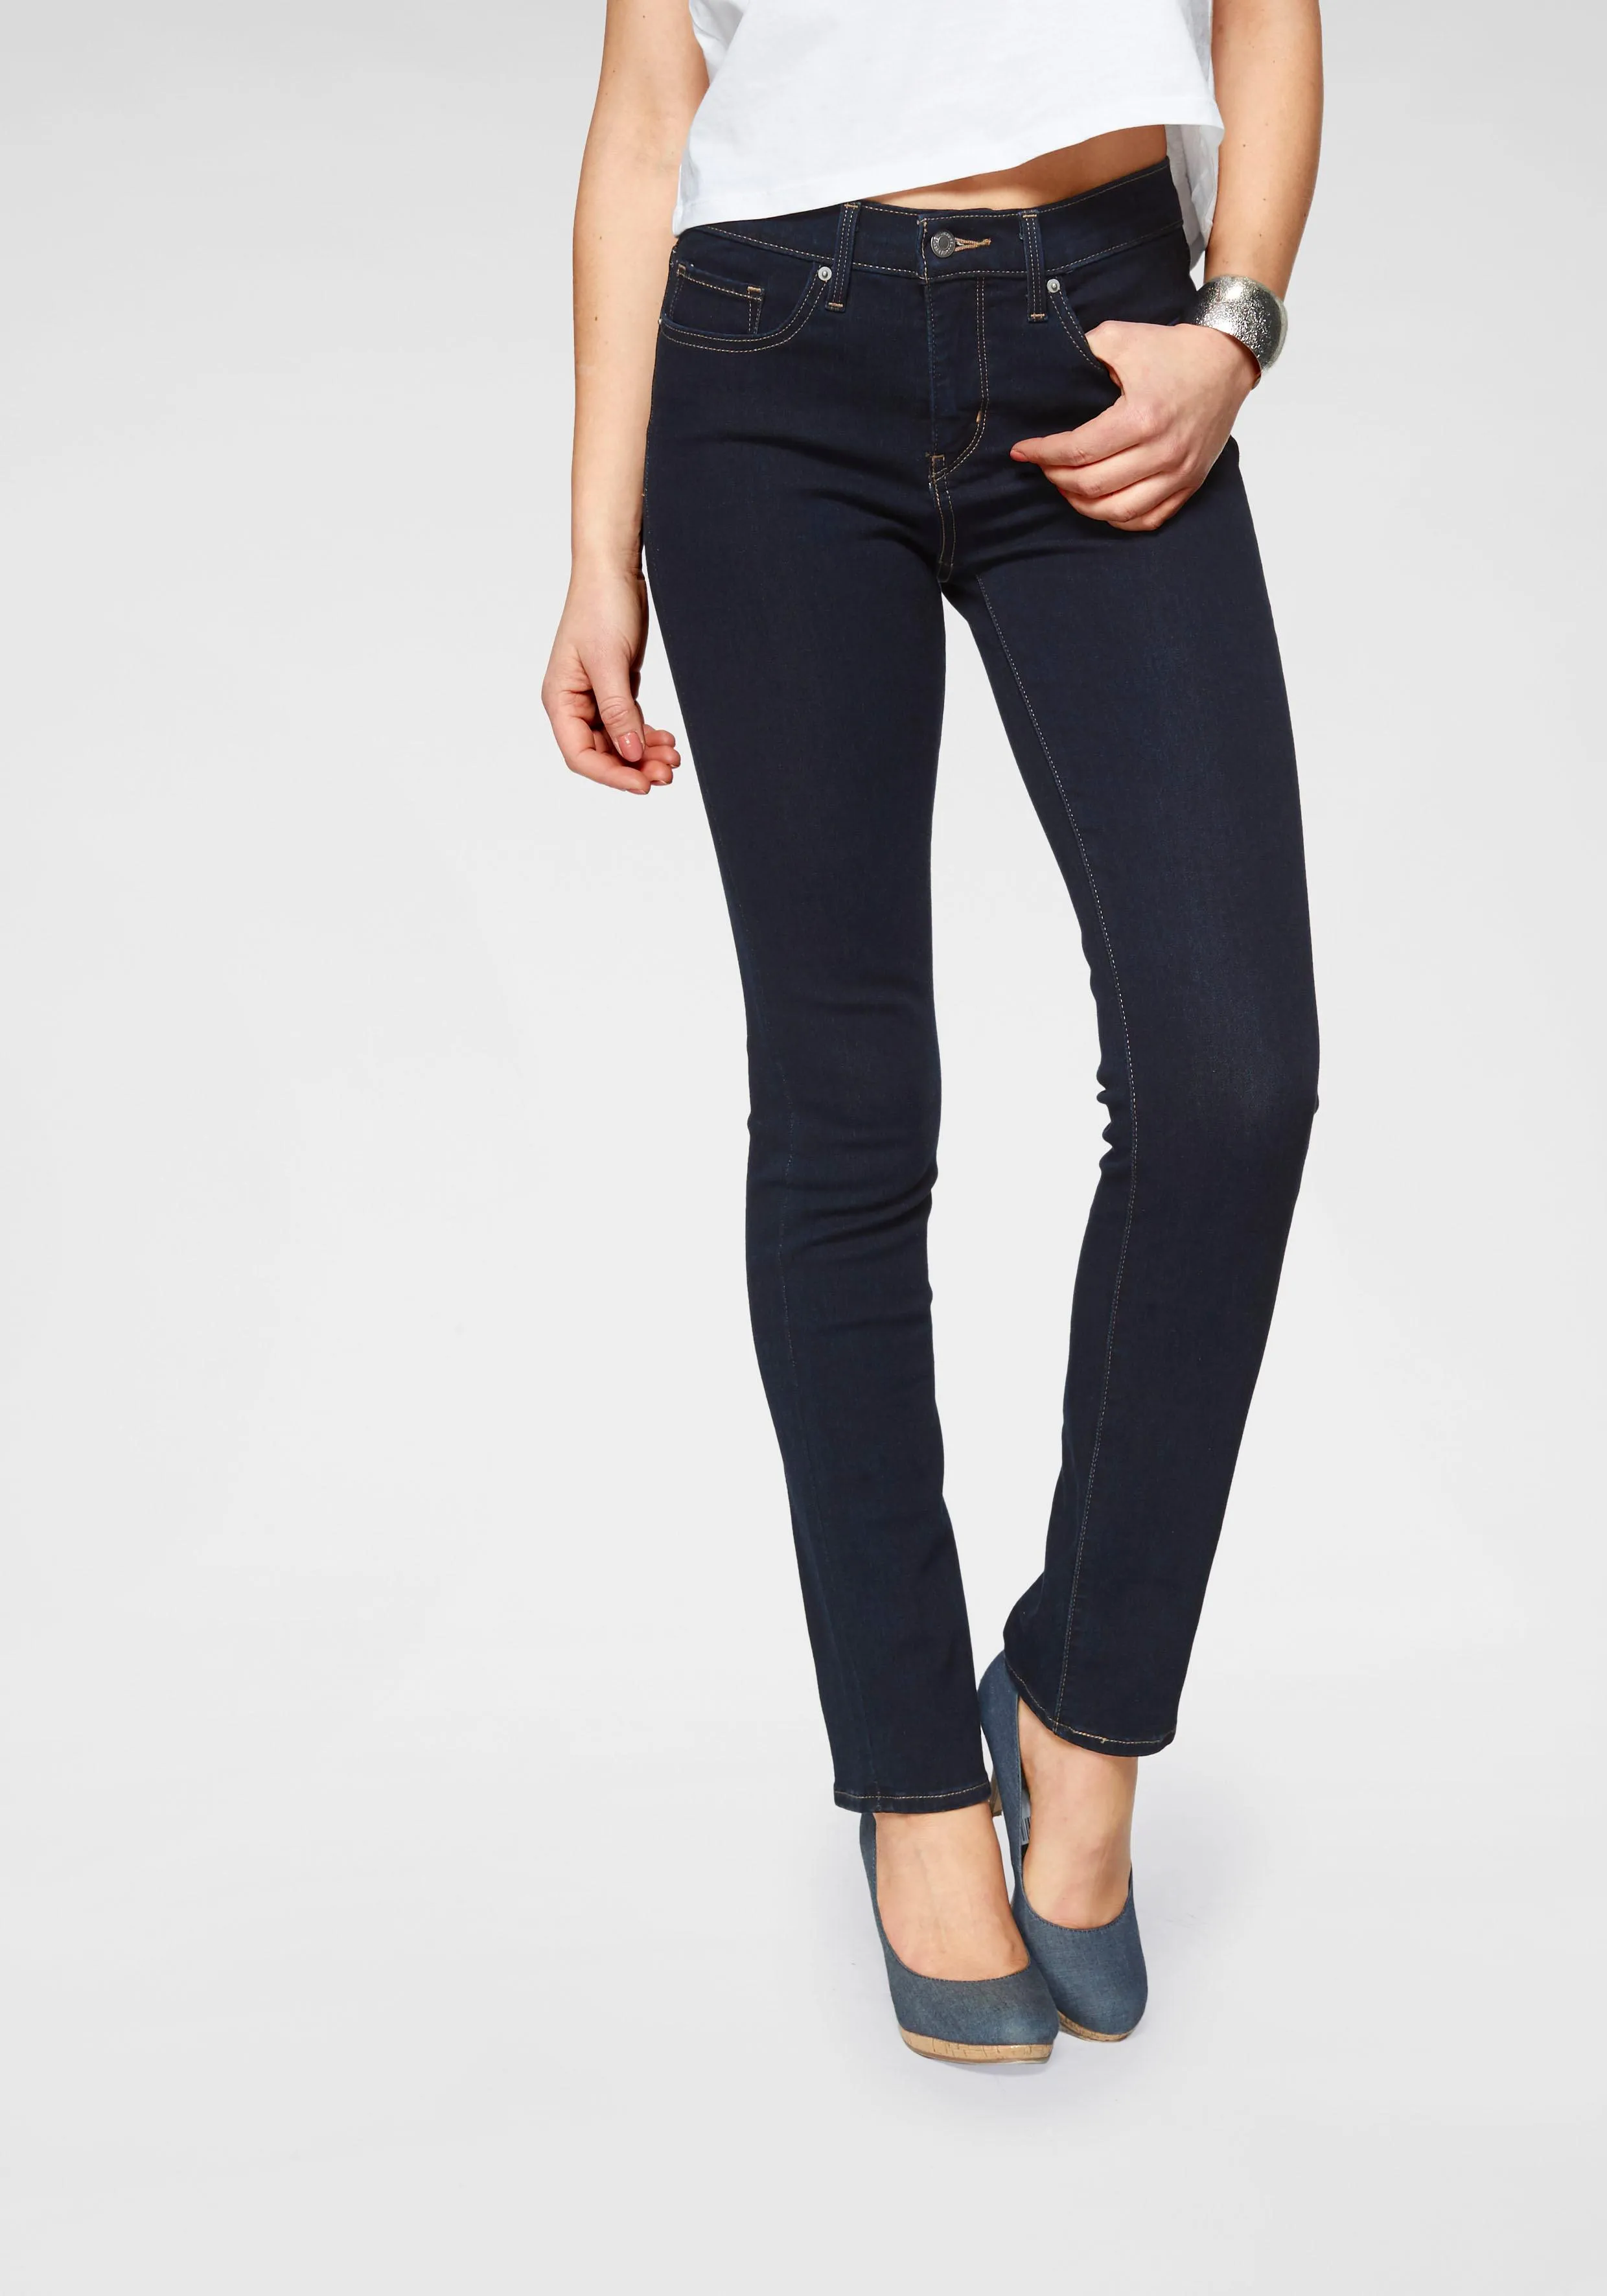 Levi's® Röhrenjeans »312 Shaping Slim«, Schmale Shaping Slim Form Levi's® rinsed 30